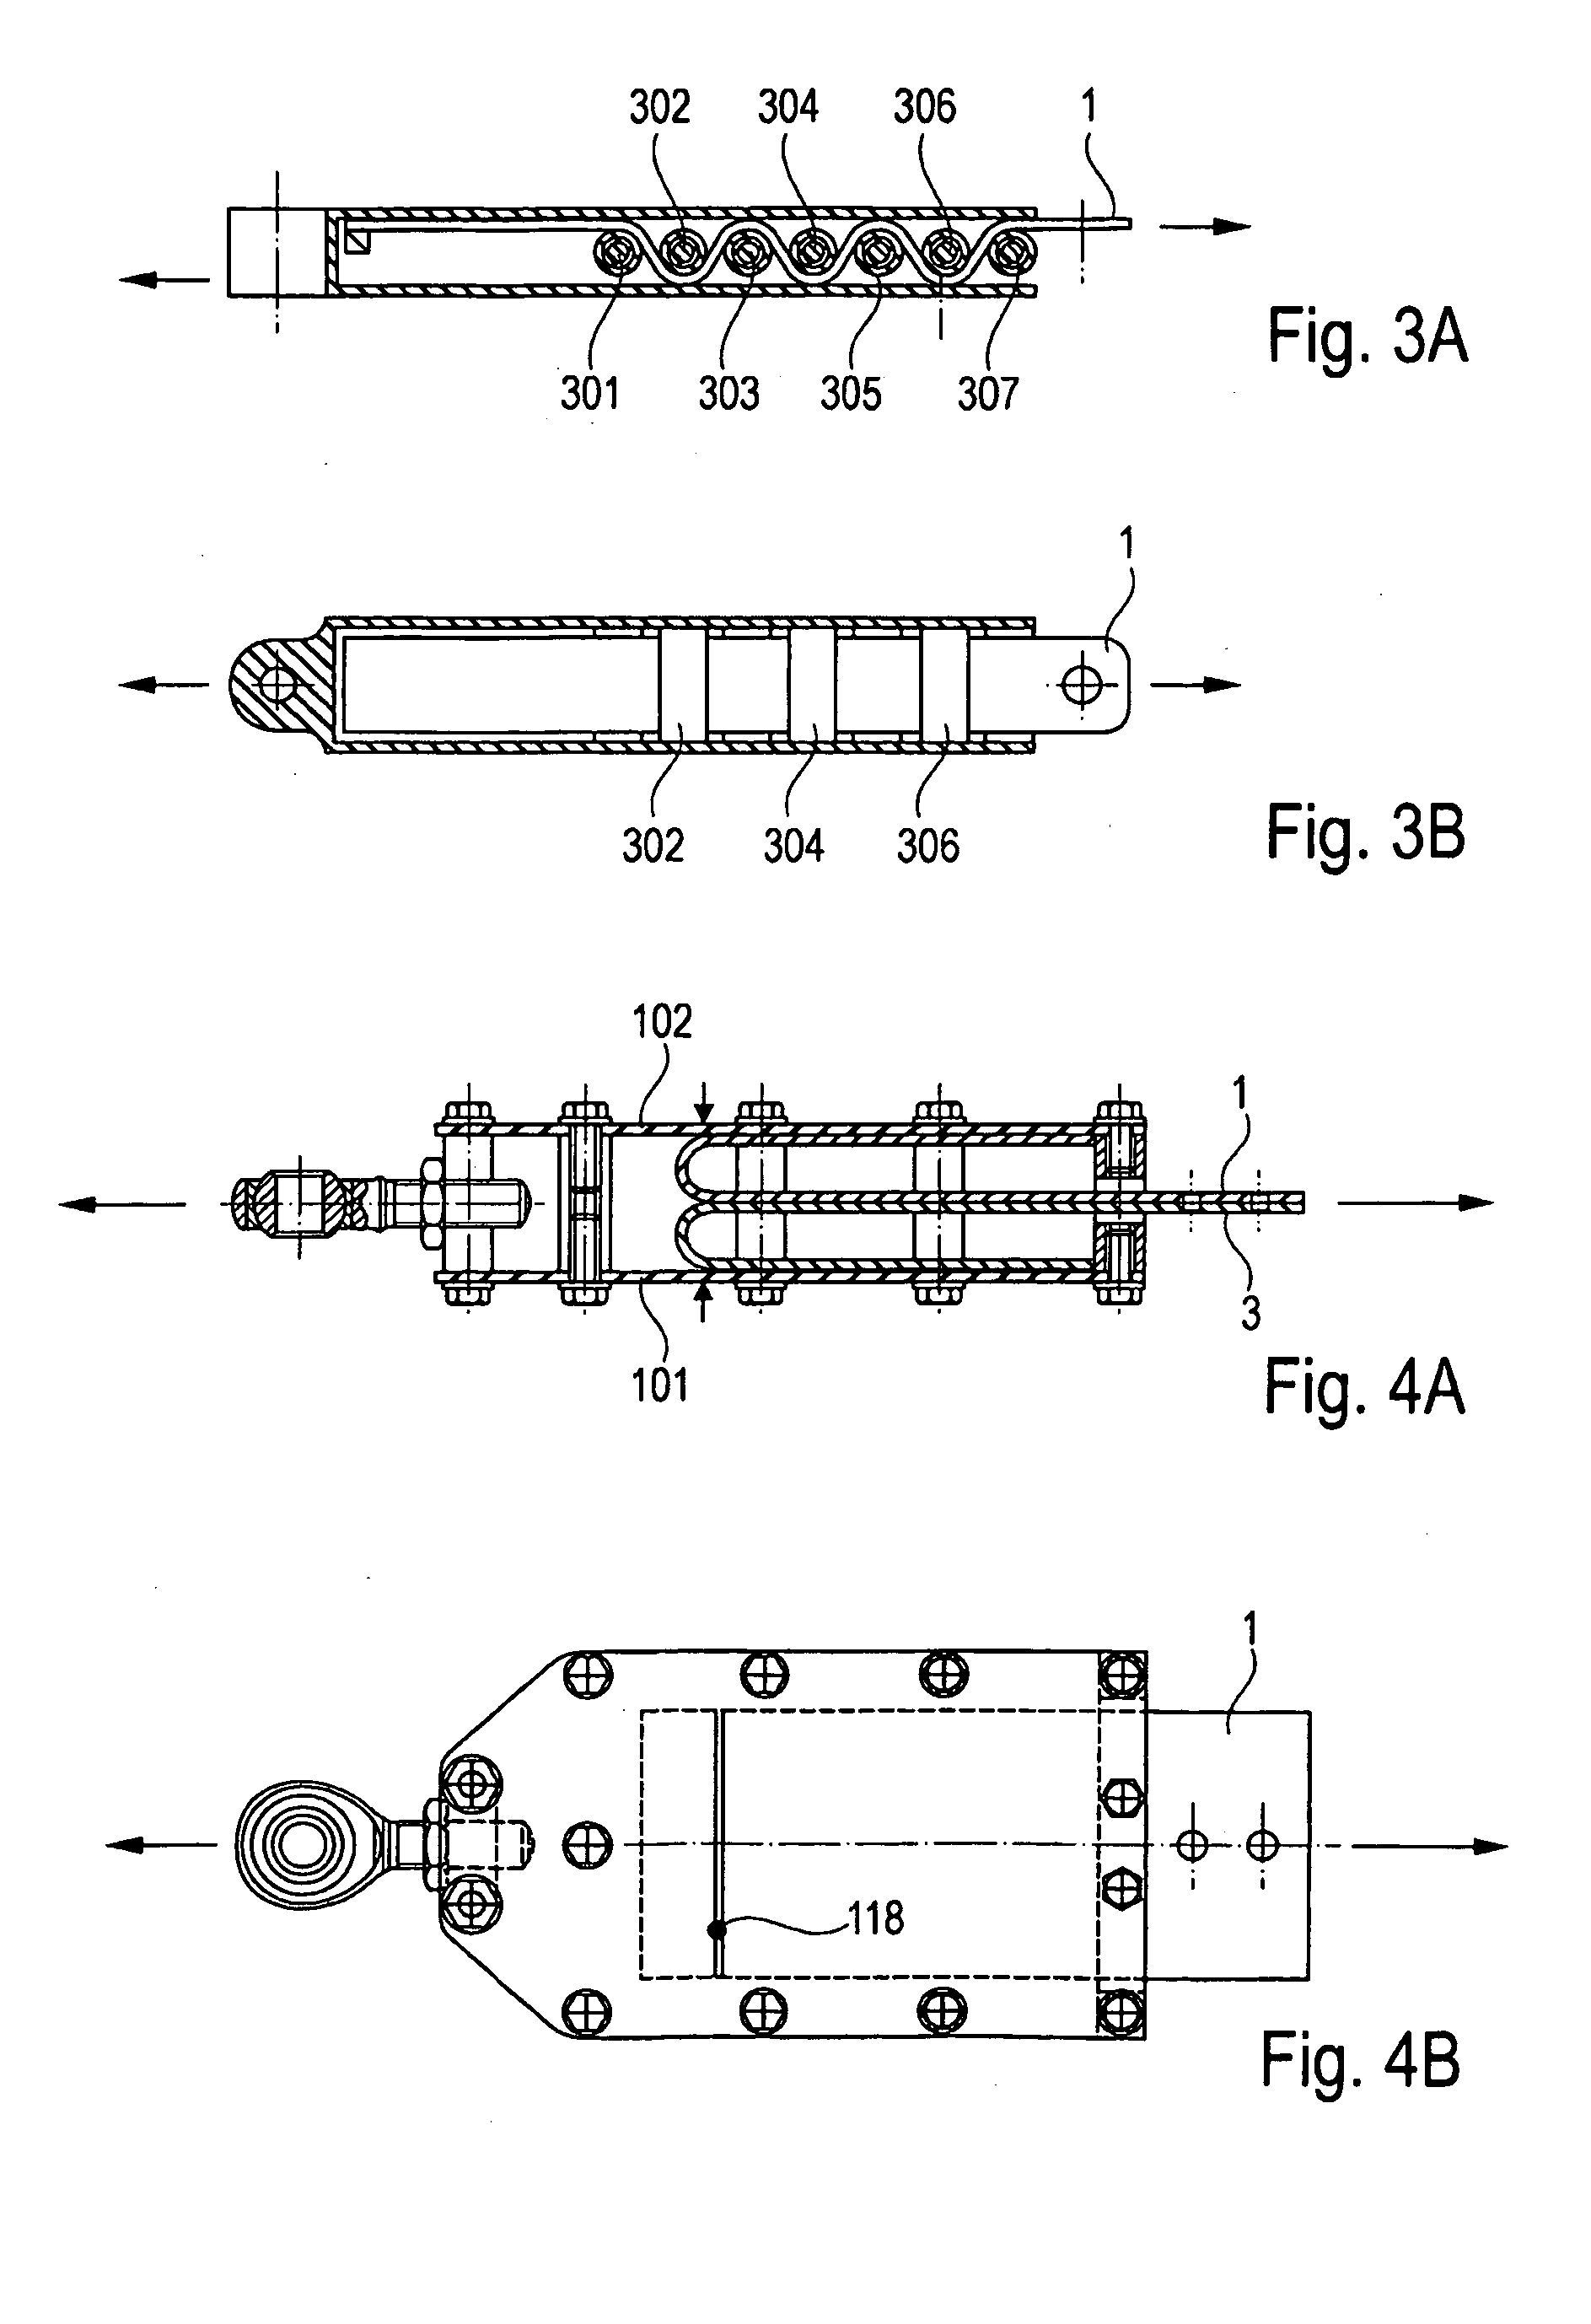 Force level control for an energy absorber for aircraft